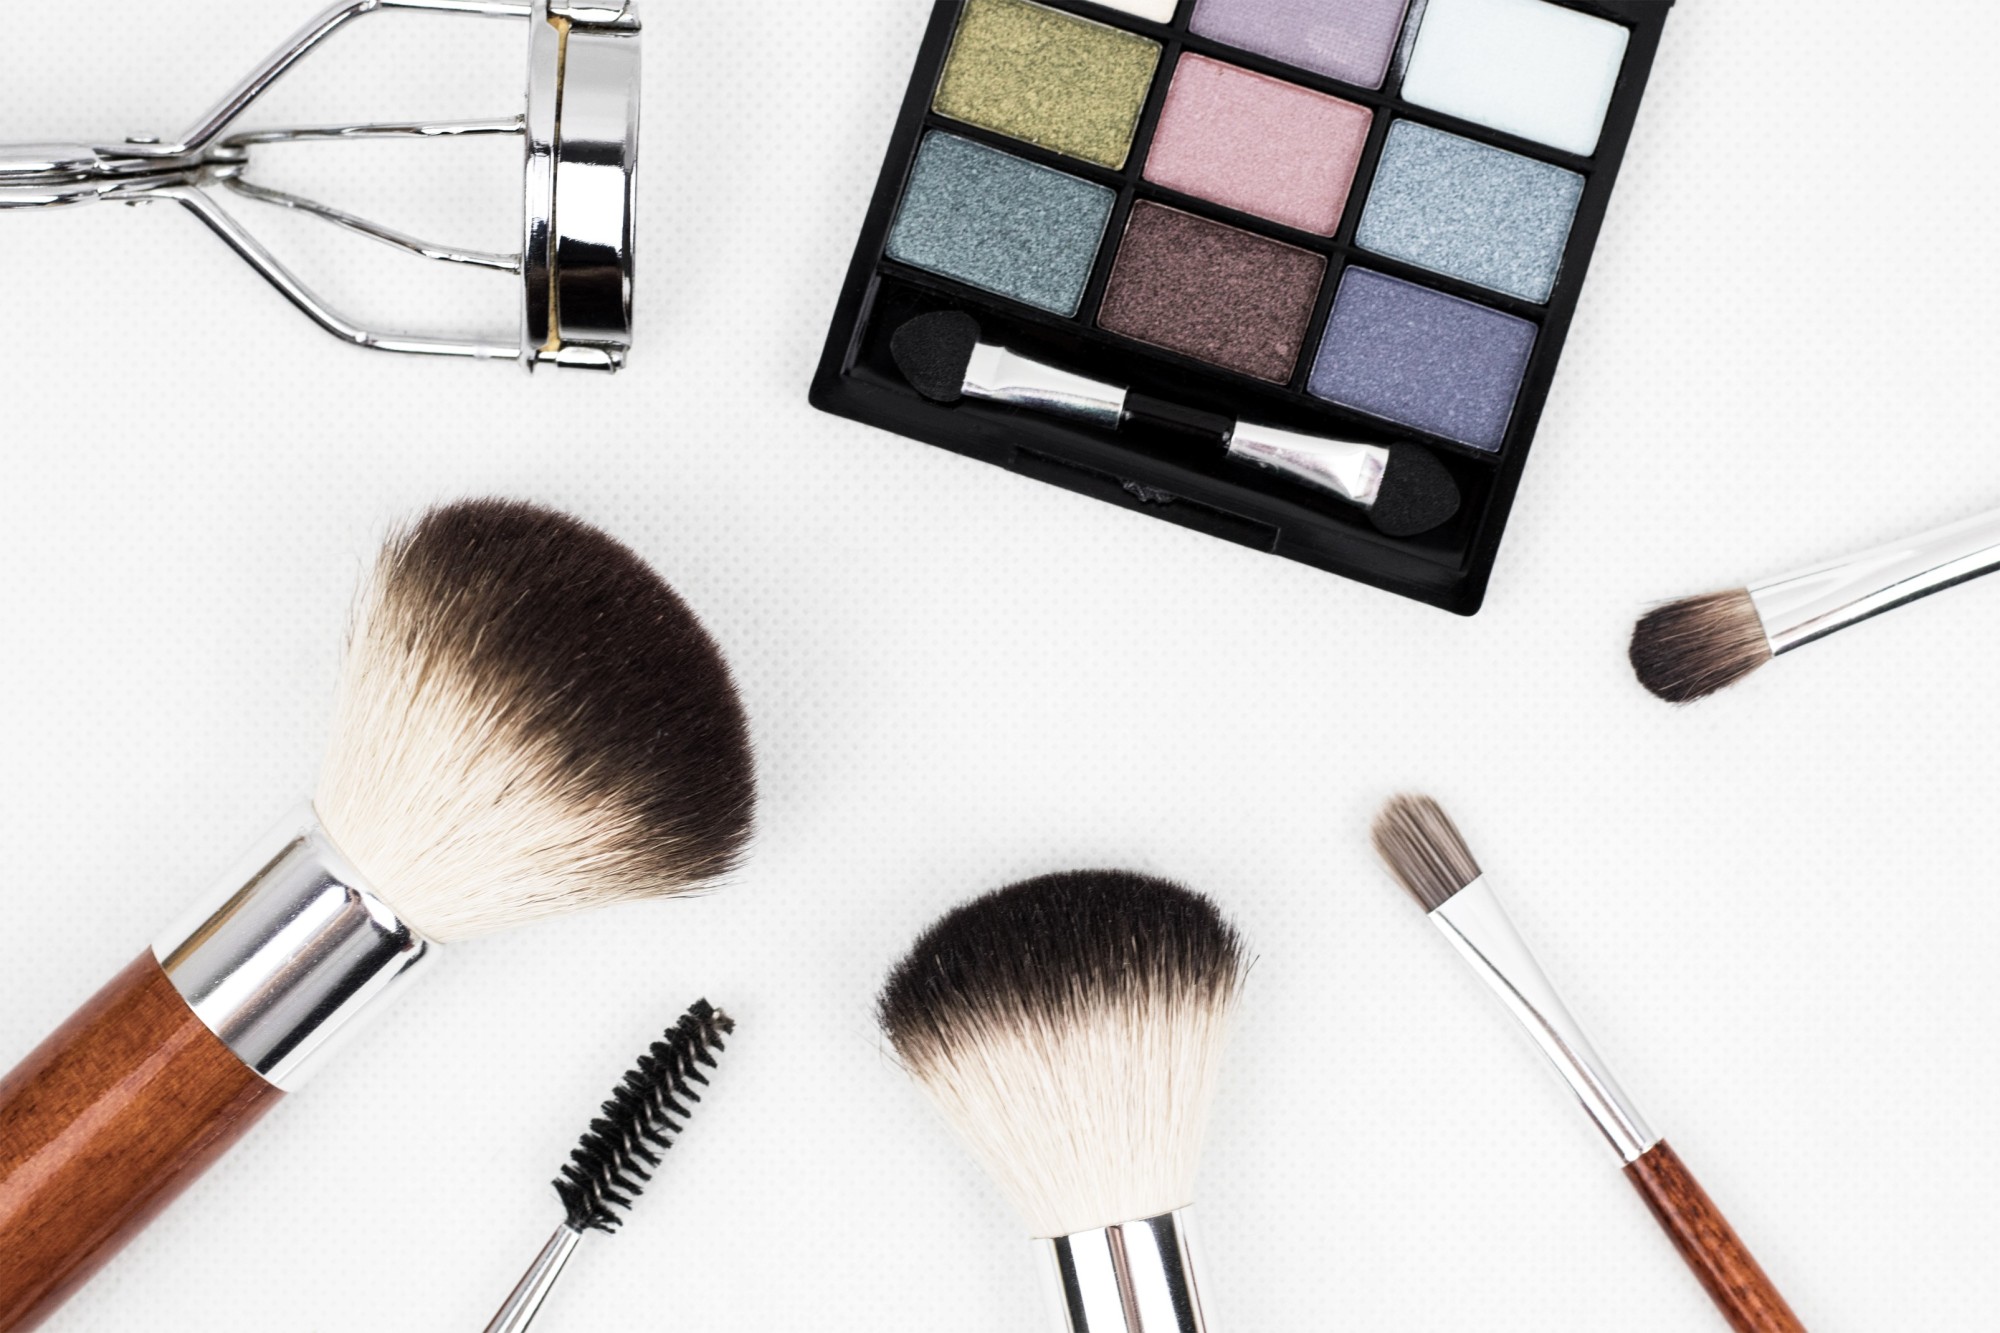 If you are worried your makeup may be causing you harm, here is everything you need to know about talc in makeup and whether or not it is dangerous.